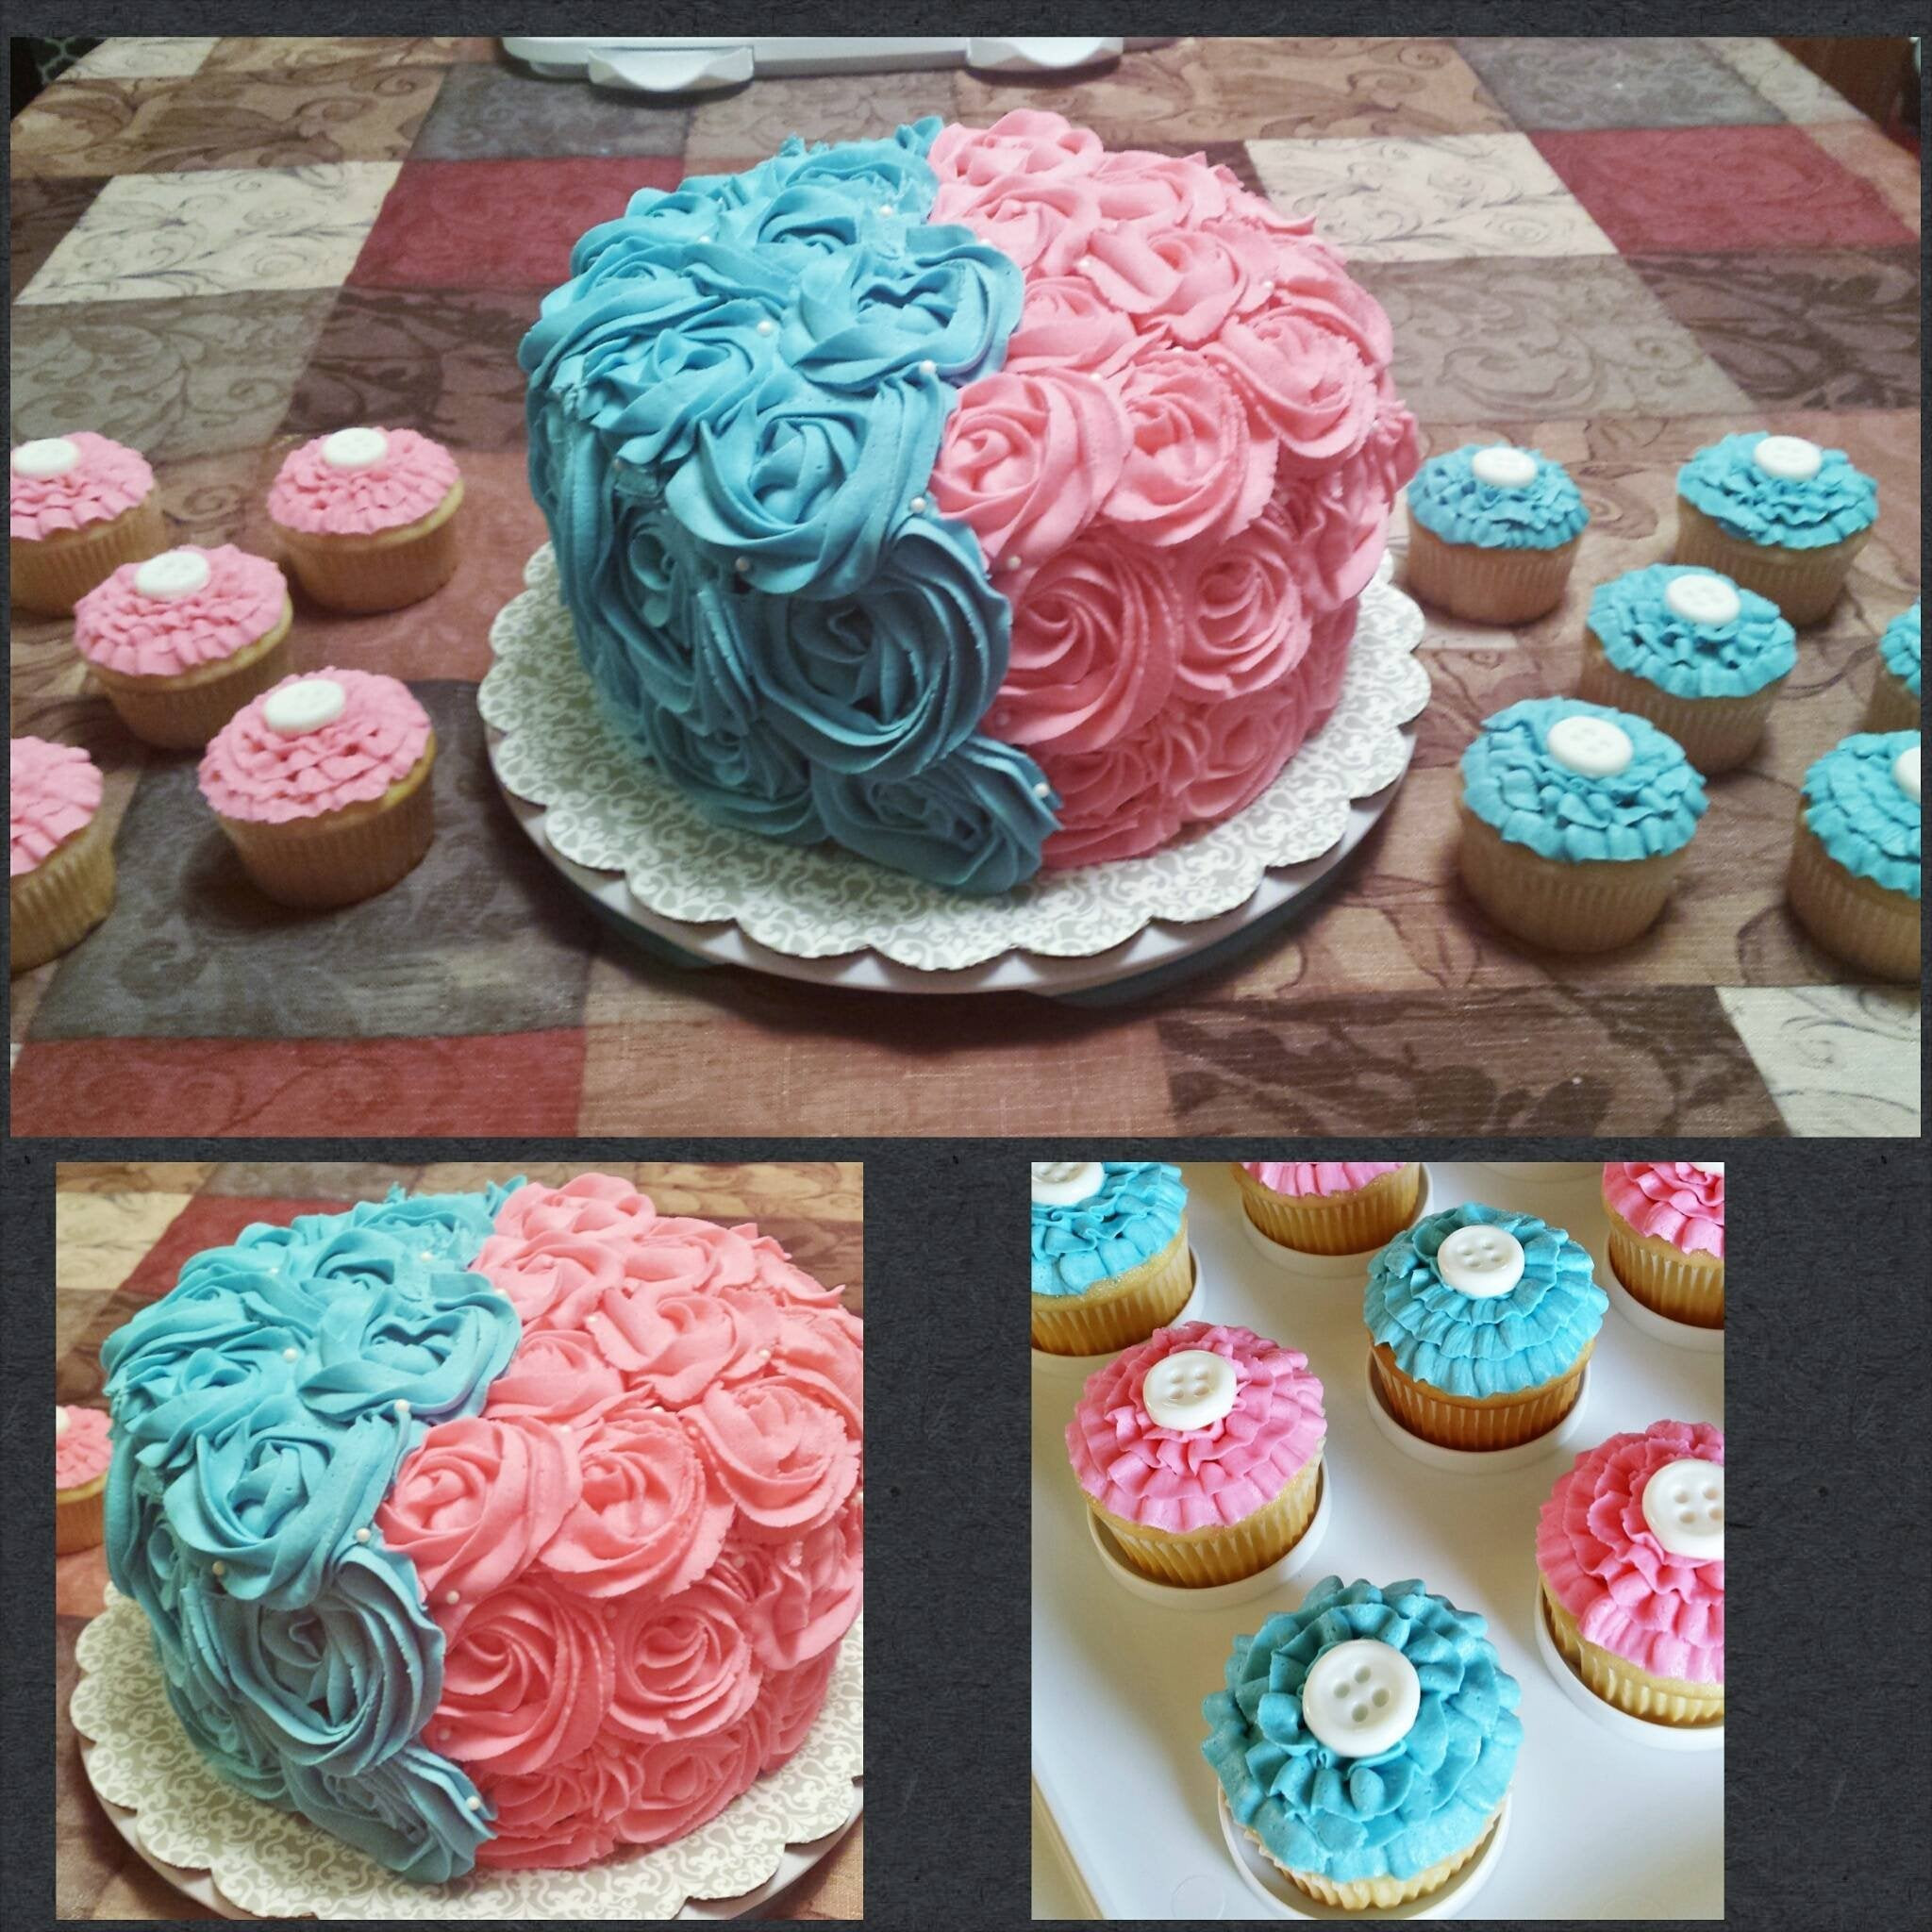 Gender Reveal Party Cake Ideas
 I made the cake and cupcakes for a baby gender reveal